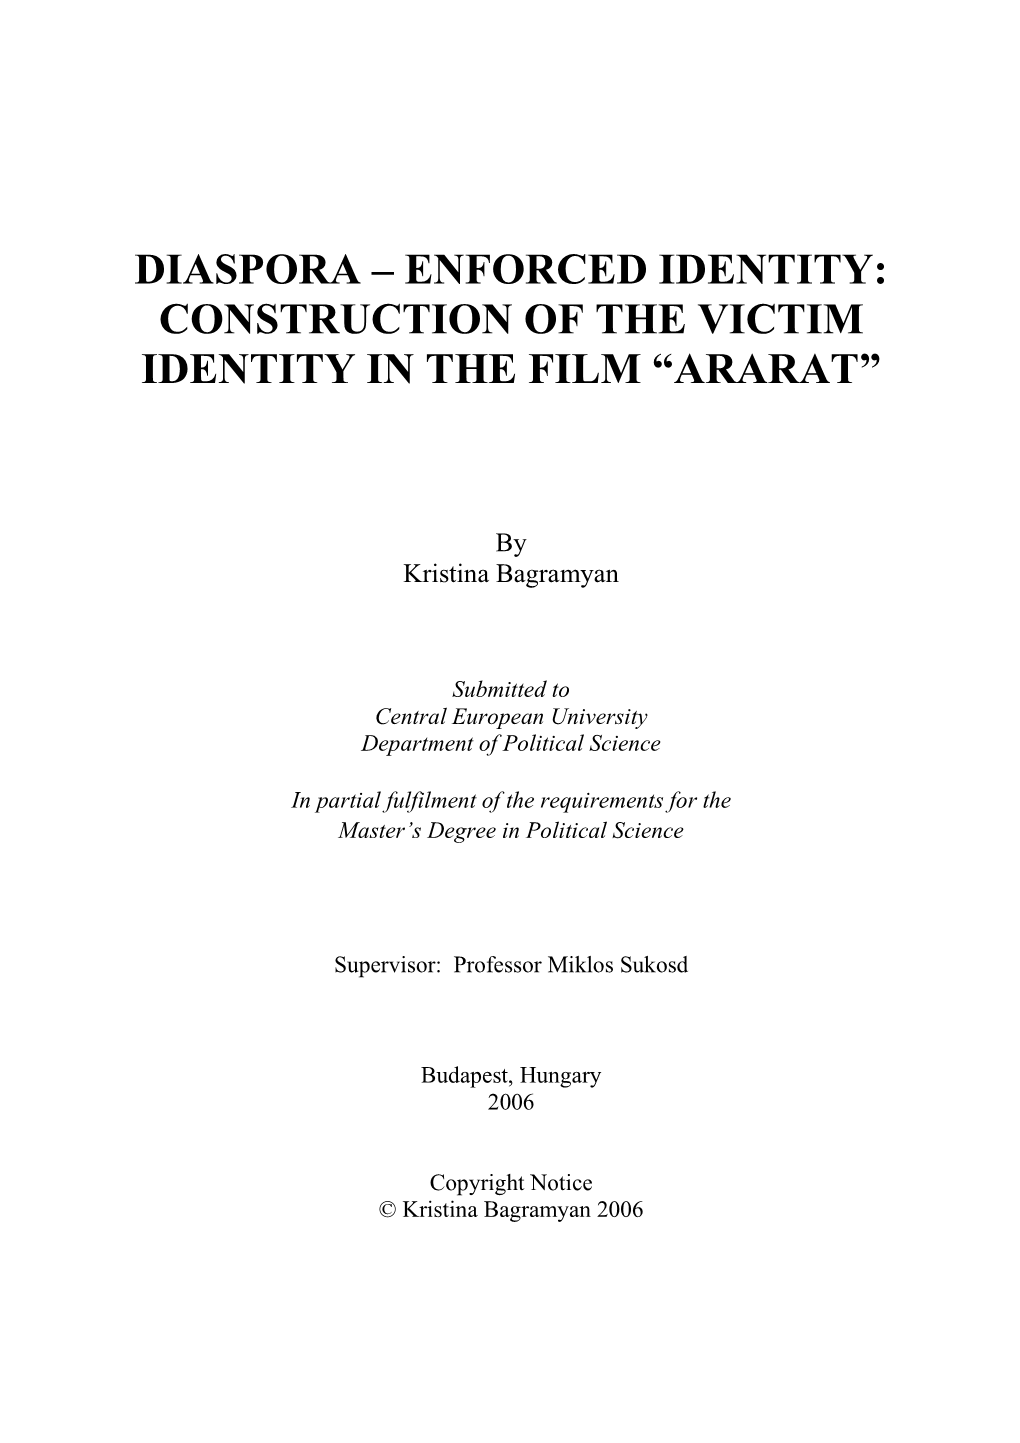 Diaspora-Enforced Identity: Construction of the Victim in the Film